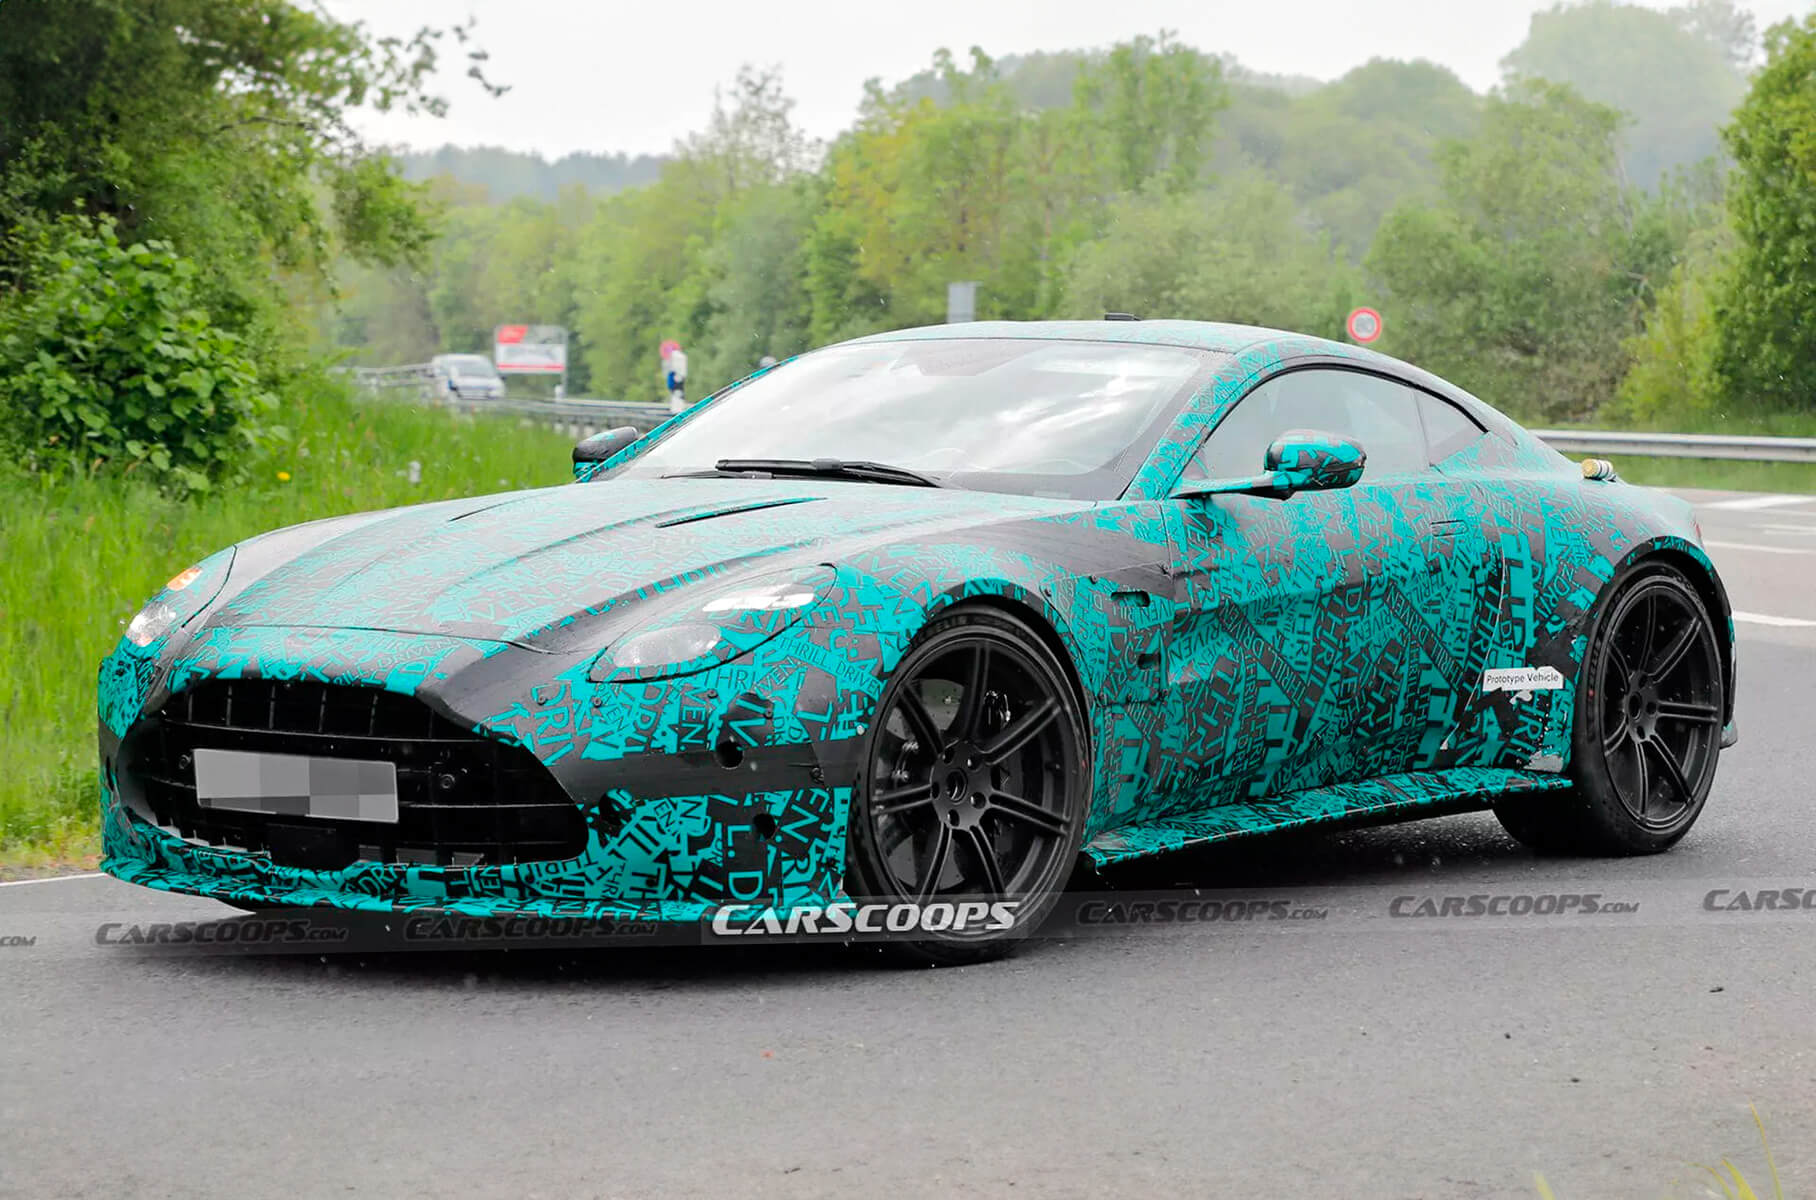 Aston Martin has published a new teaser of the fastest Vantage